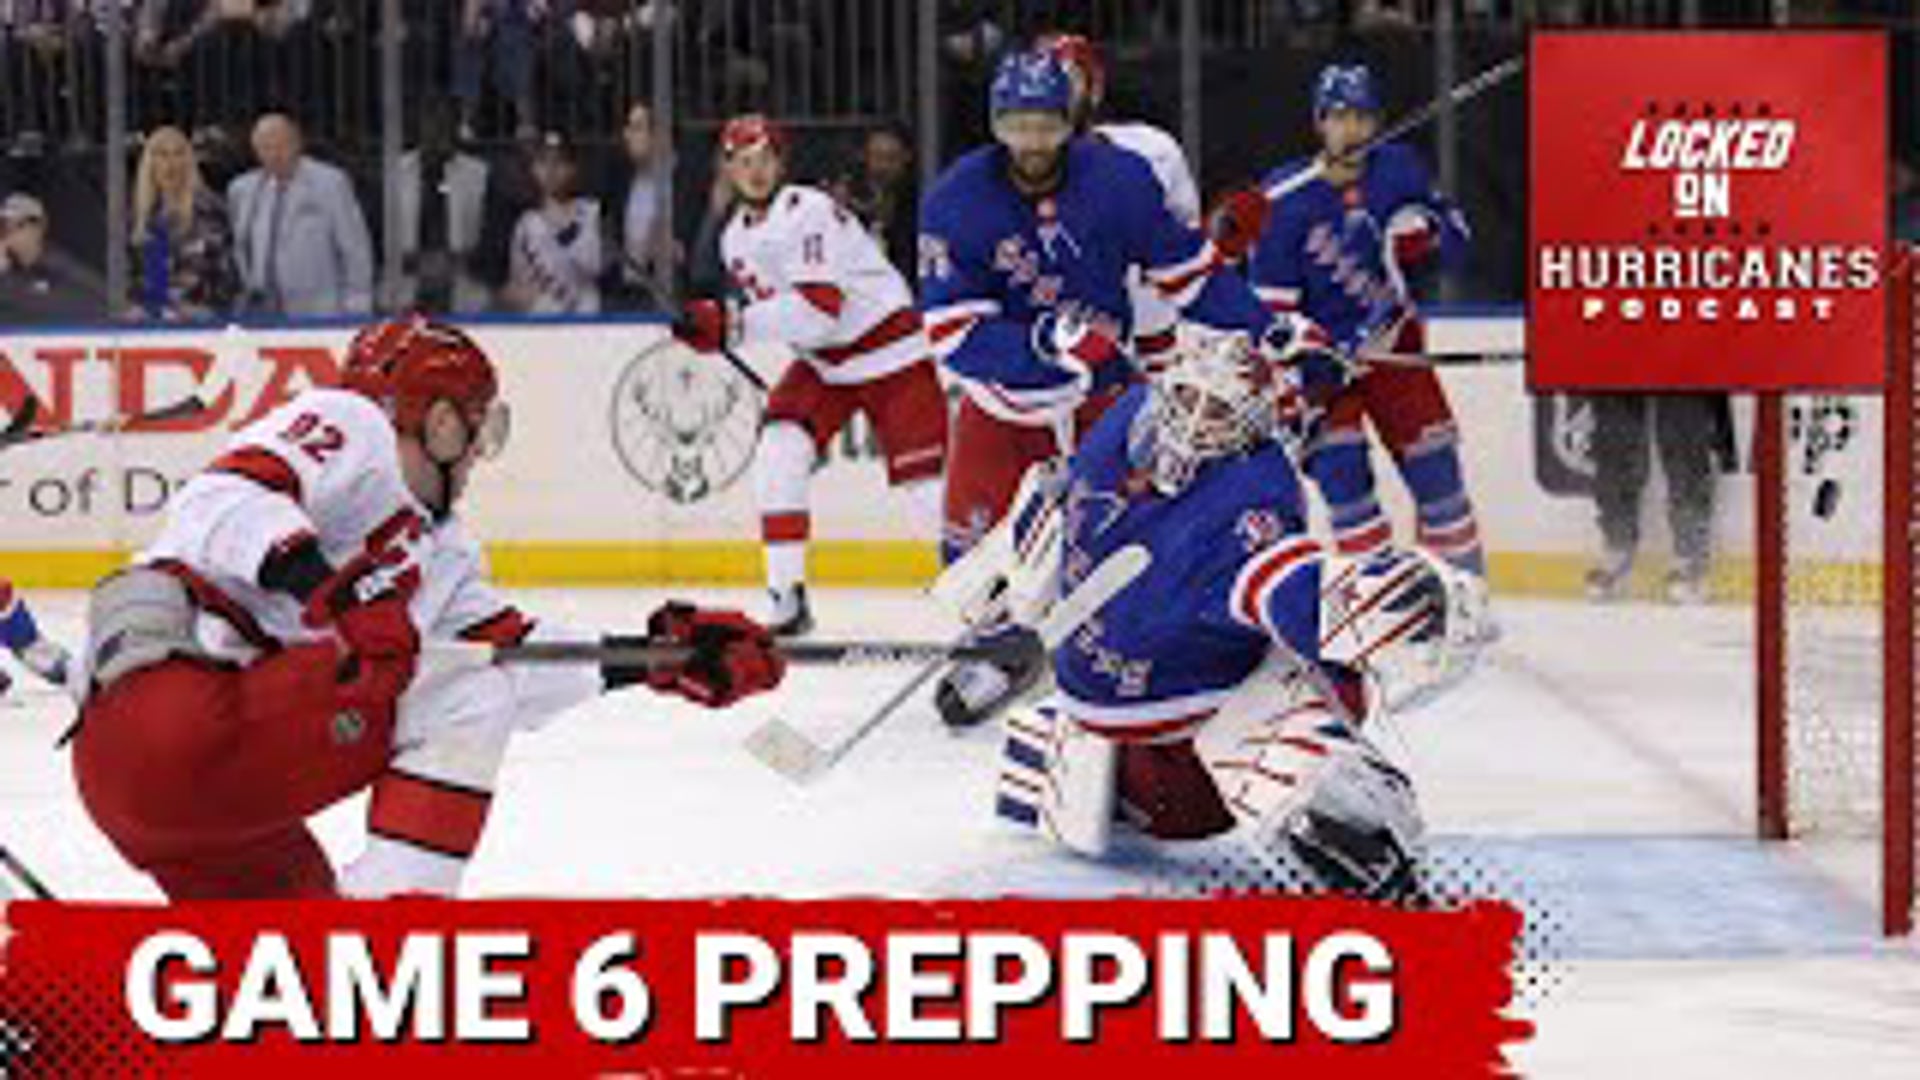 The Canes look to take game 6 Thursday night and force a shocking game 7 against the Rangers. That and more on Locked On Hurricanes.